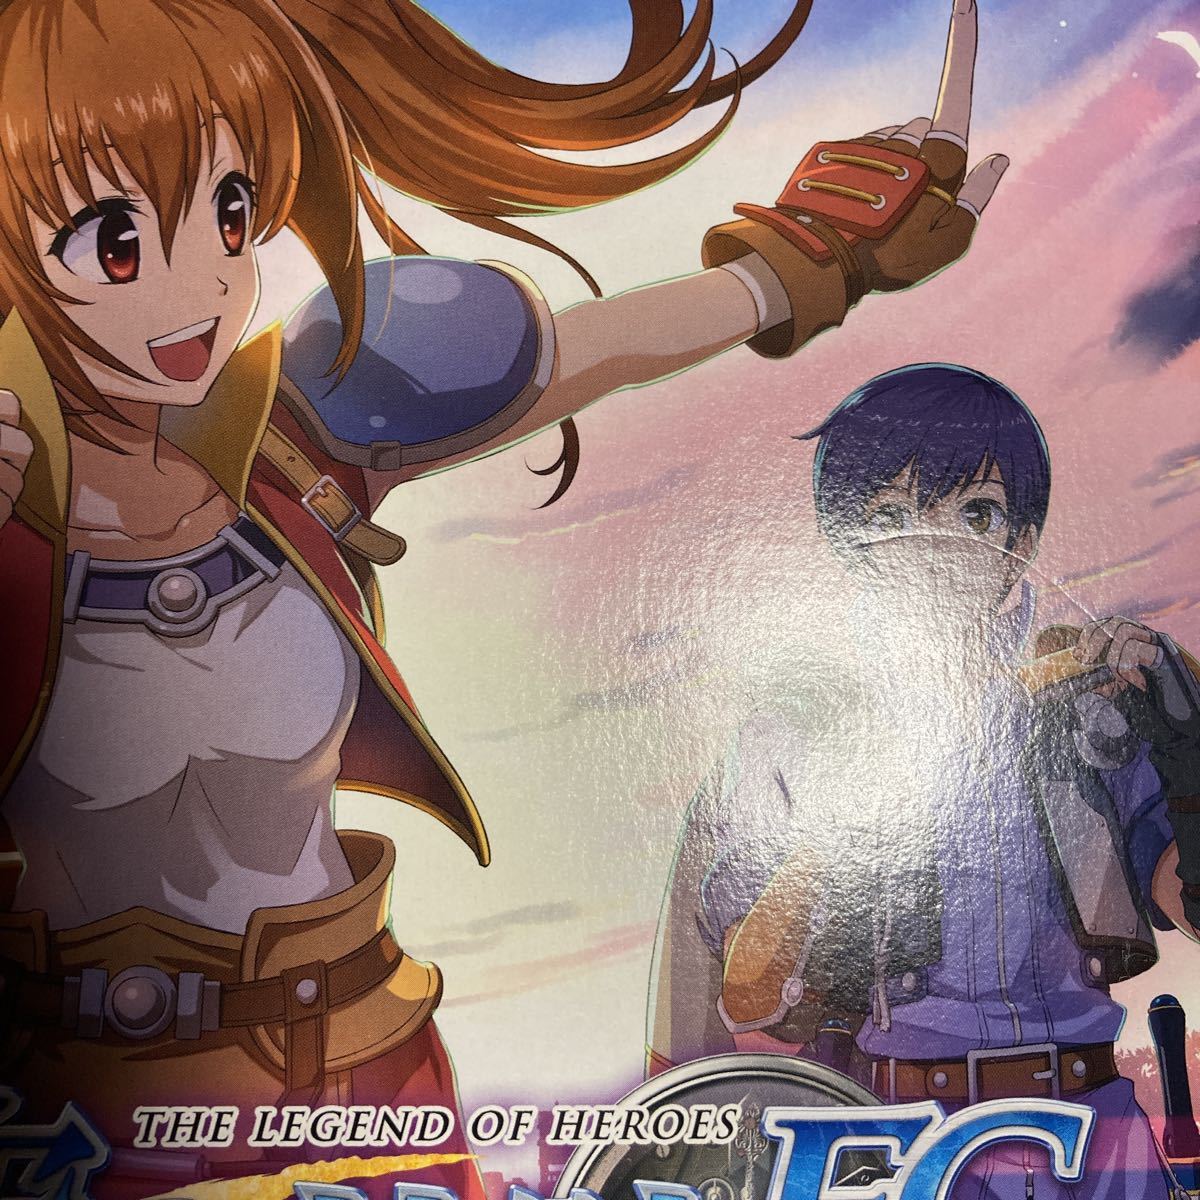  The Legend of Heroes Trails in the Sky FC Evolution limitation version - PS Vita( secondhand goods ) free shipping 